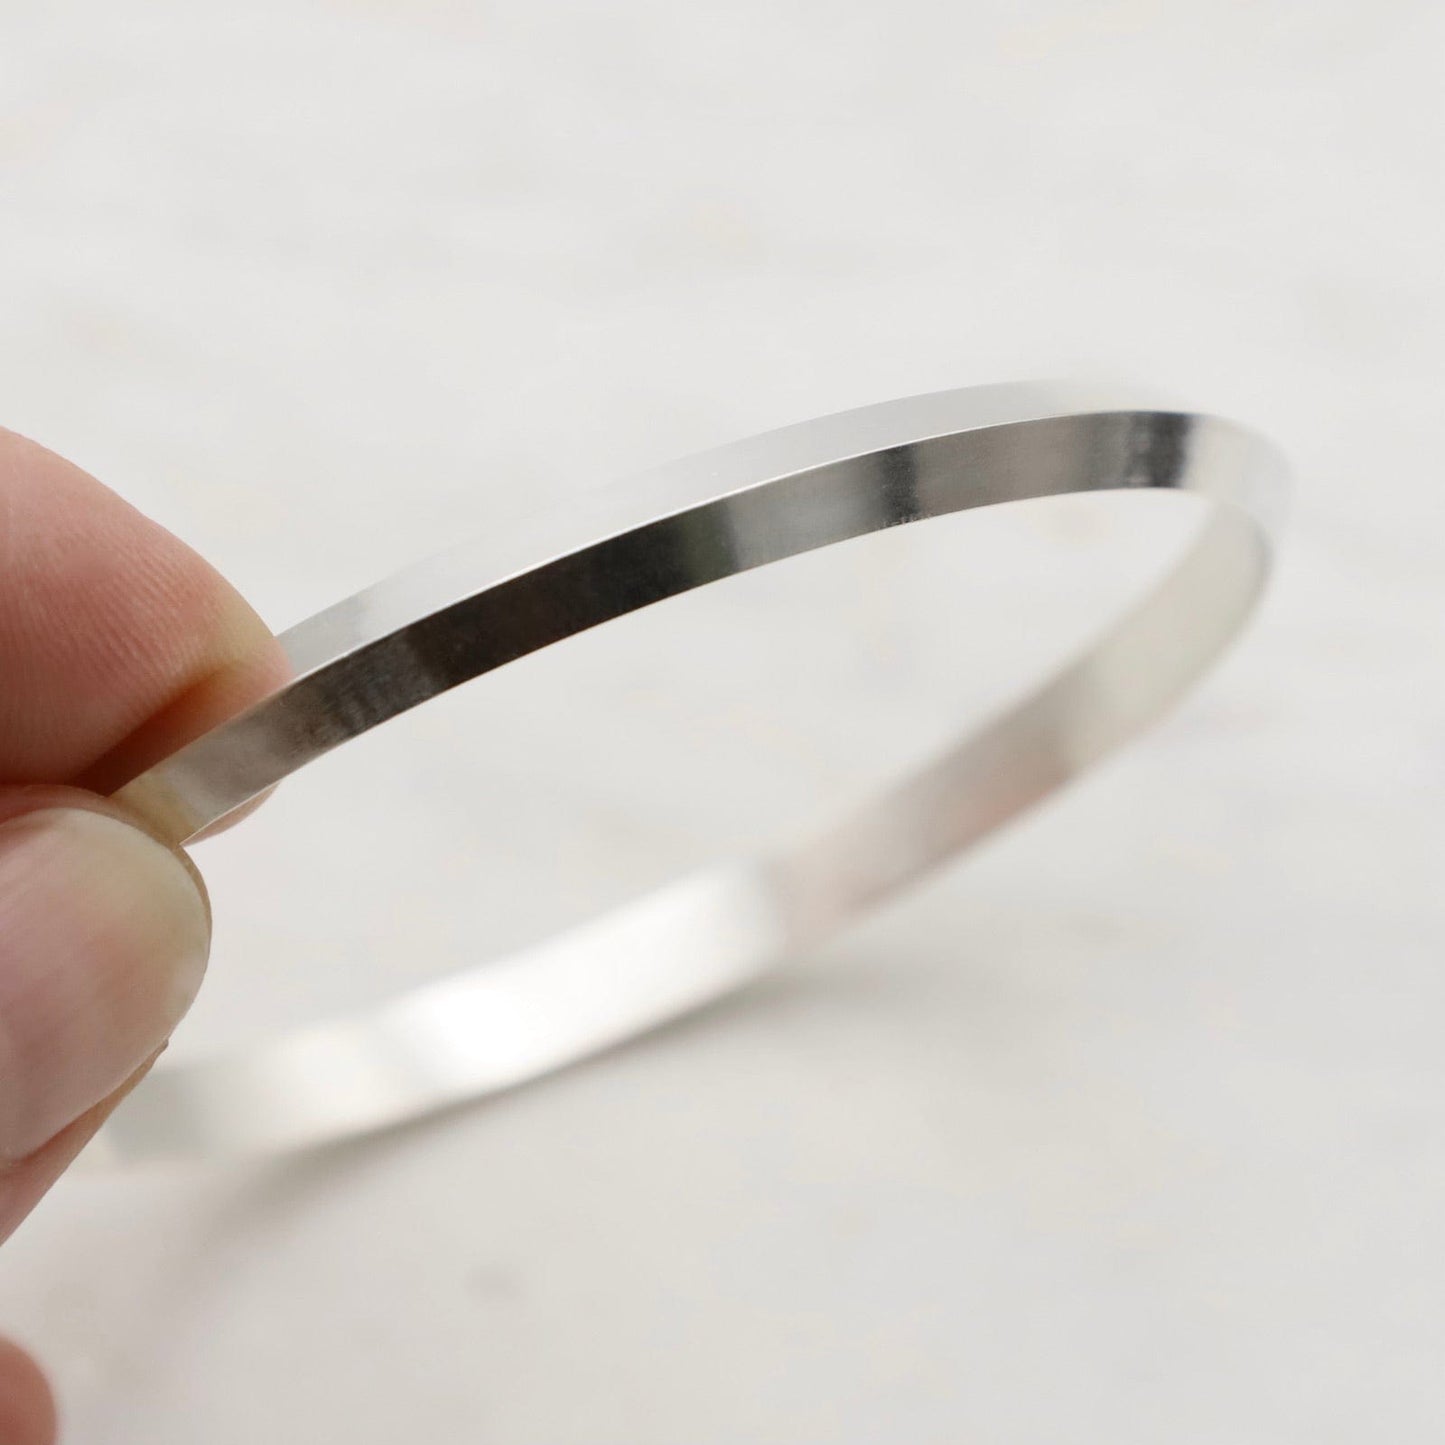 BRC Wide Triangle Bangle in Polished Silver